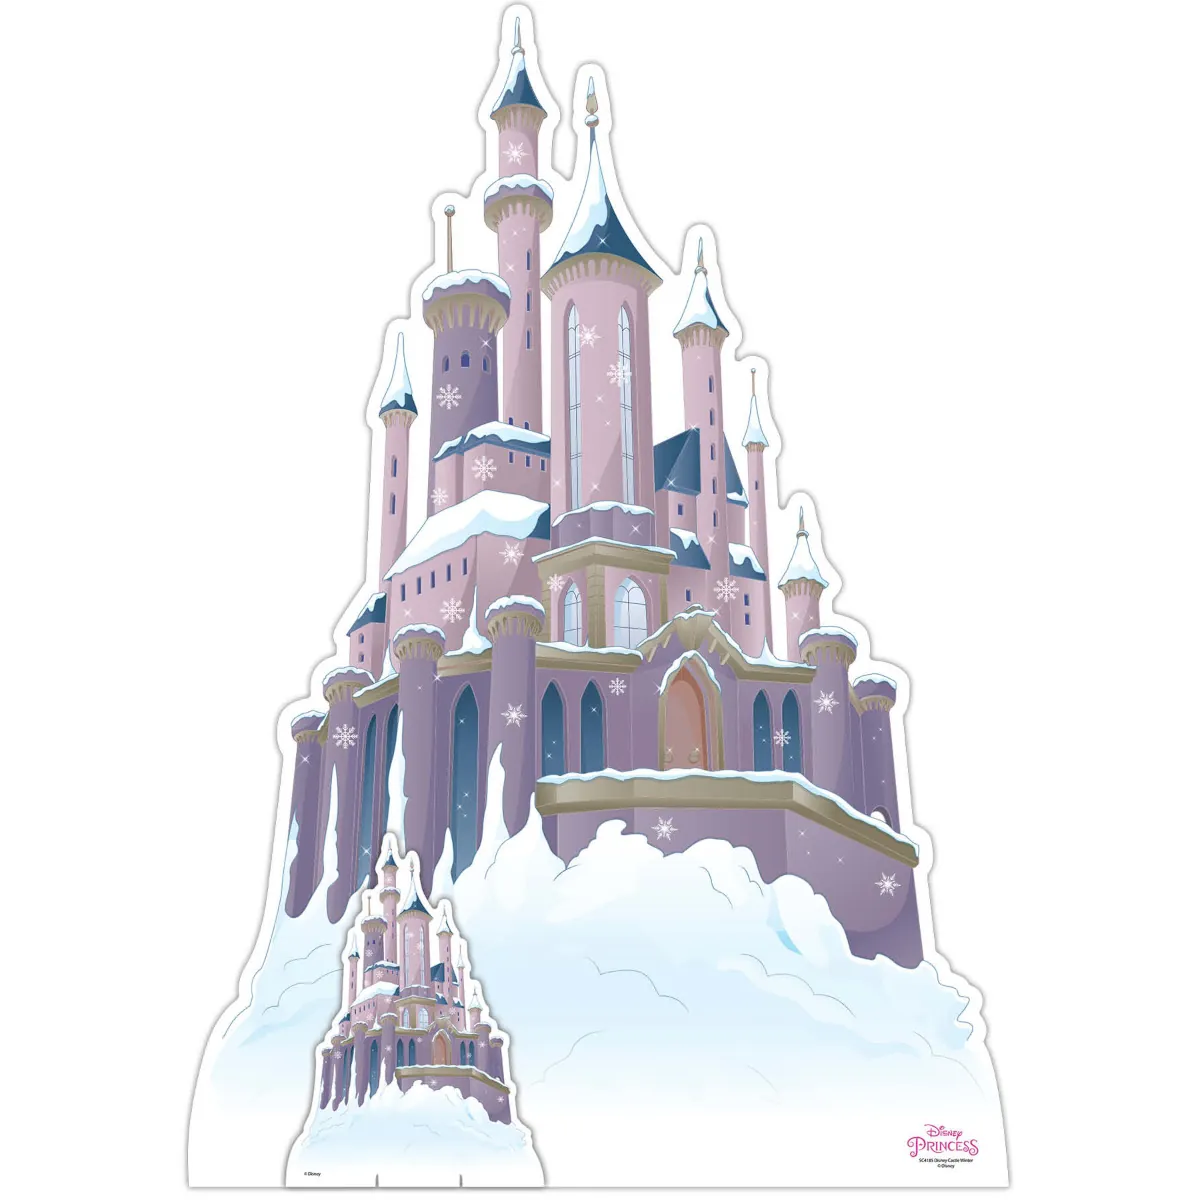 SC4185 Disney Princess 'Christmas Winter Castle' Official Large + Mini Cardboard Cutout Standee Front